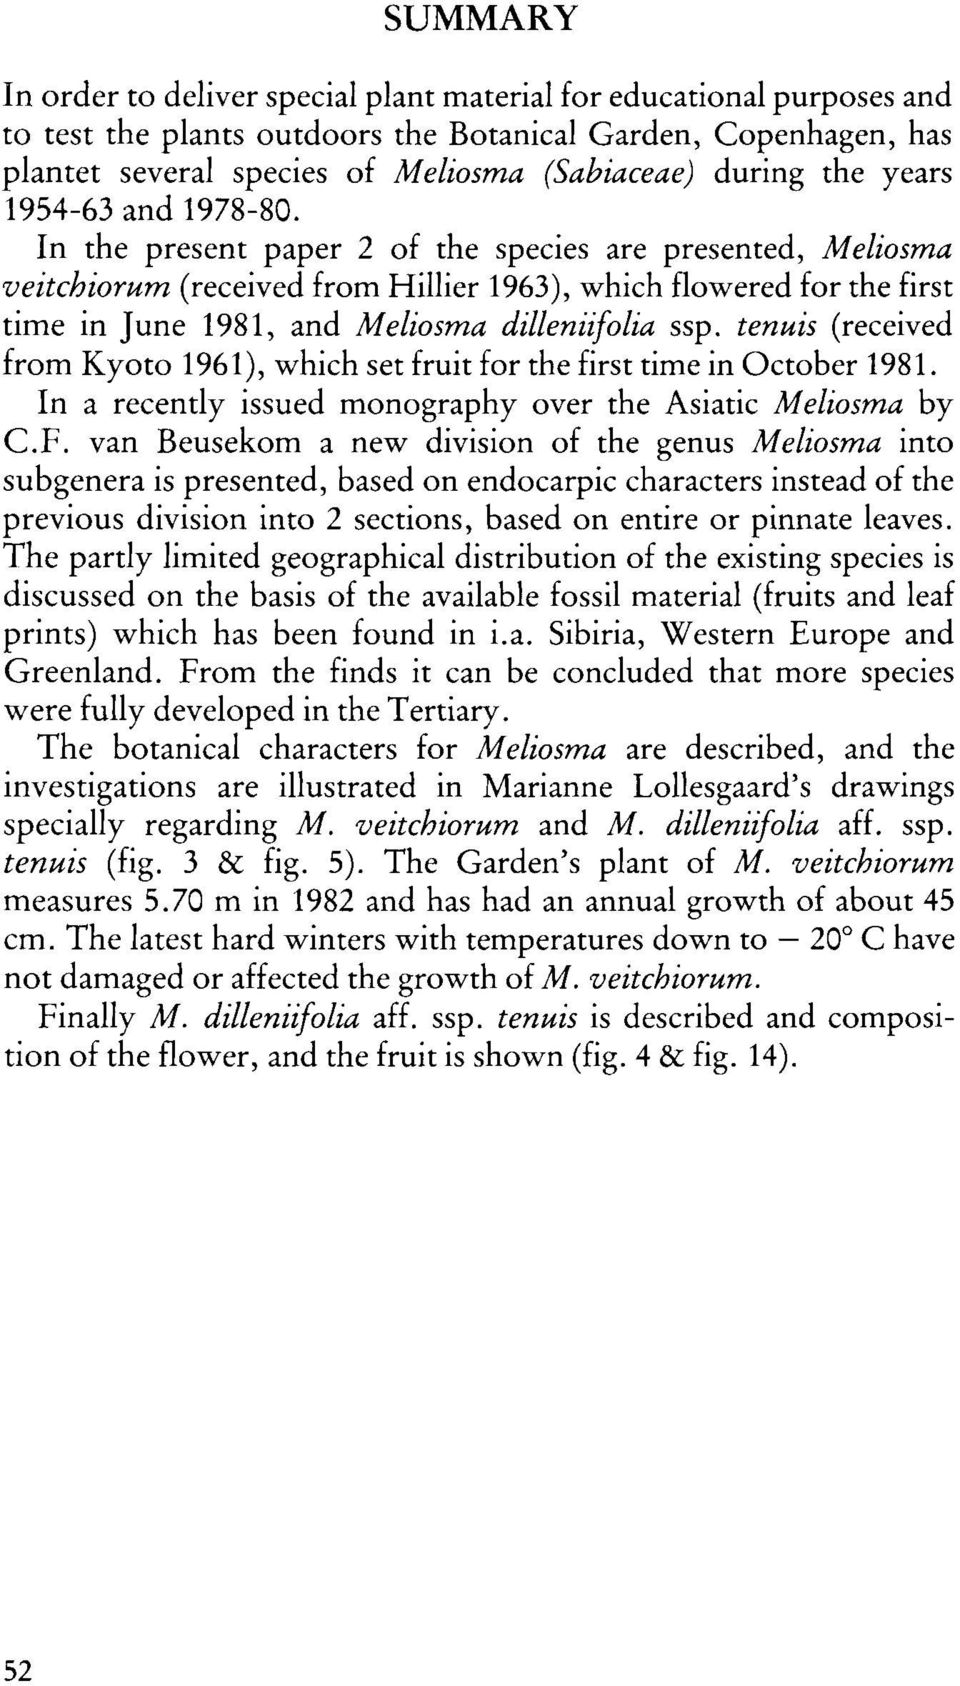 In the present paper 2 of the species are presented, Meliosma veitchiorum (received from Hillier 1963), which flowered for the first time in June 1981, and Meliosma dilleniifolia ssp.